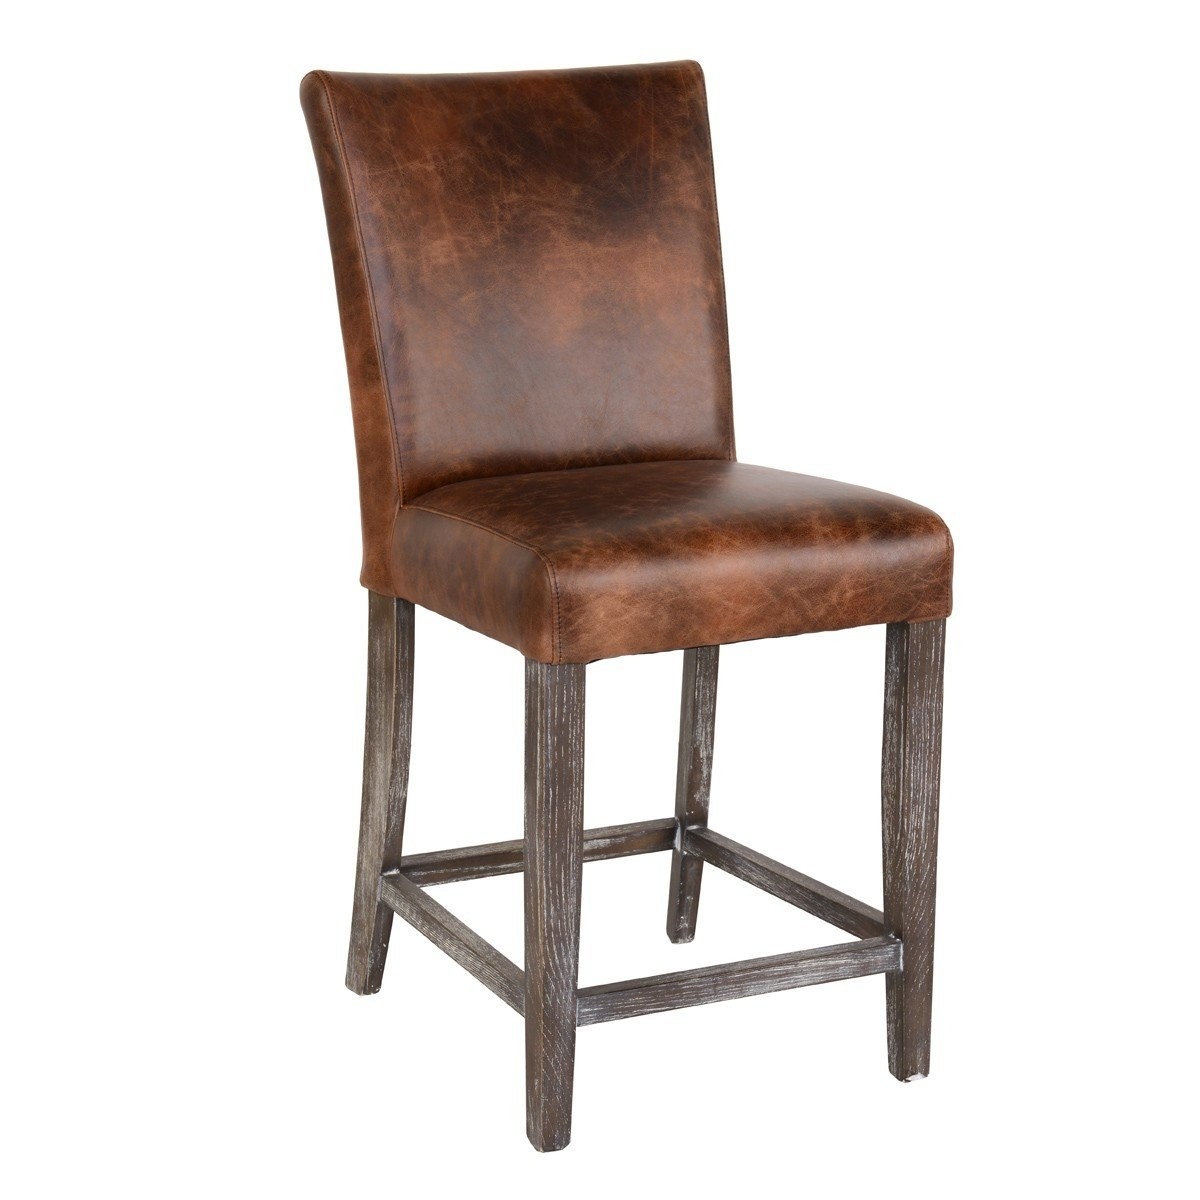 Checkman top grain leather counter stool brown classic